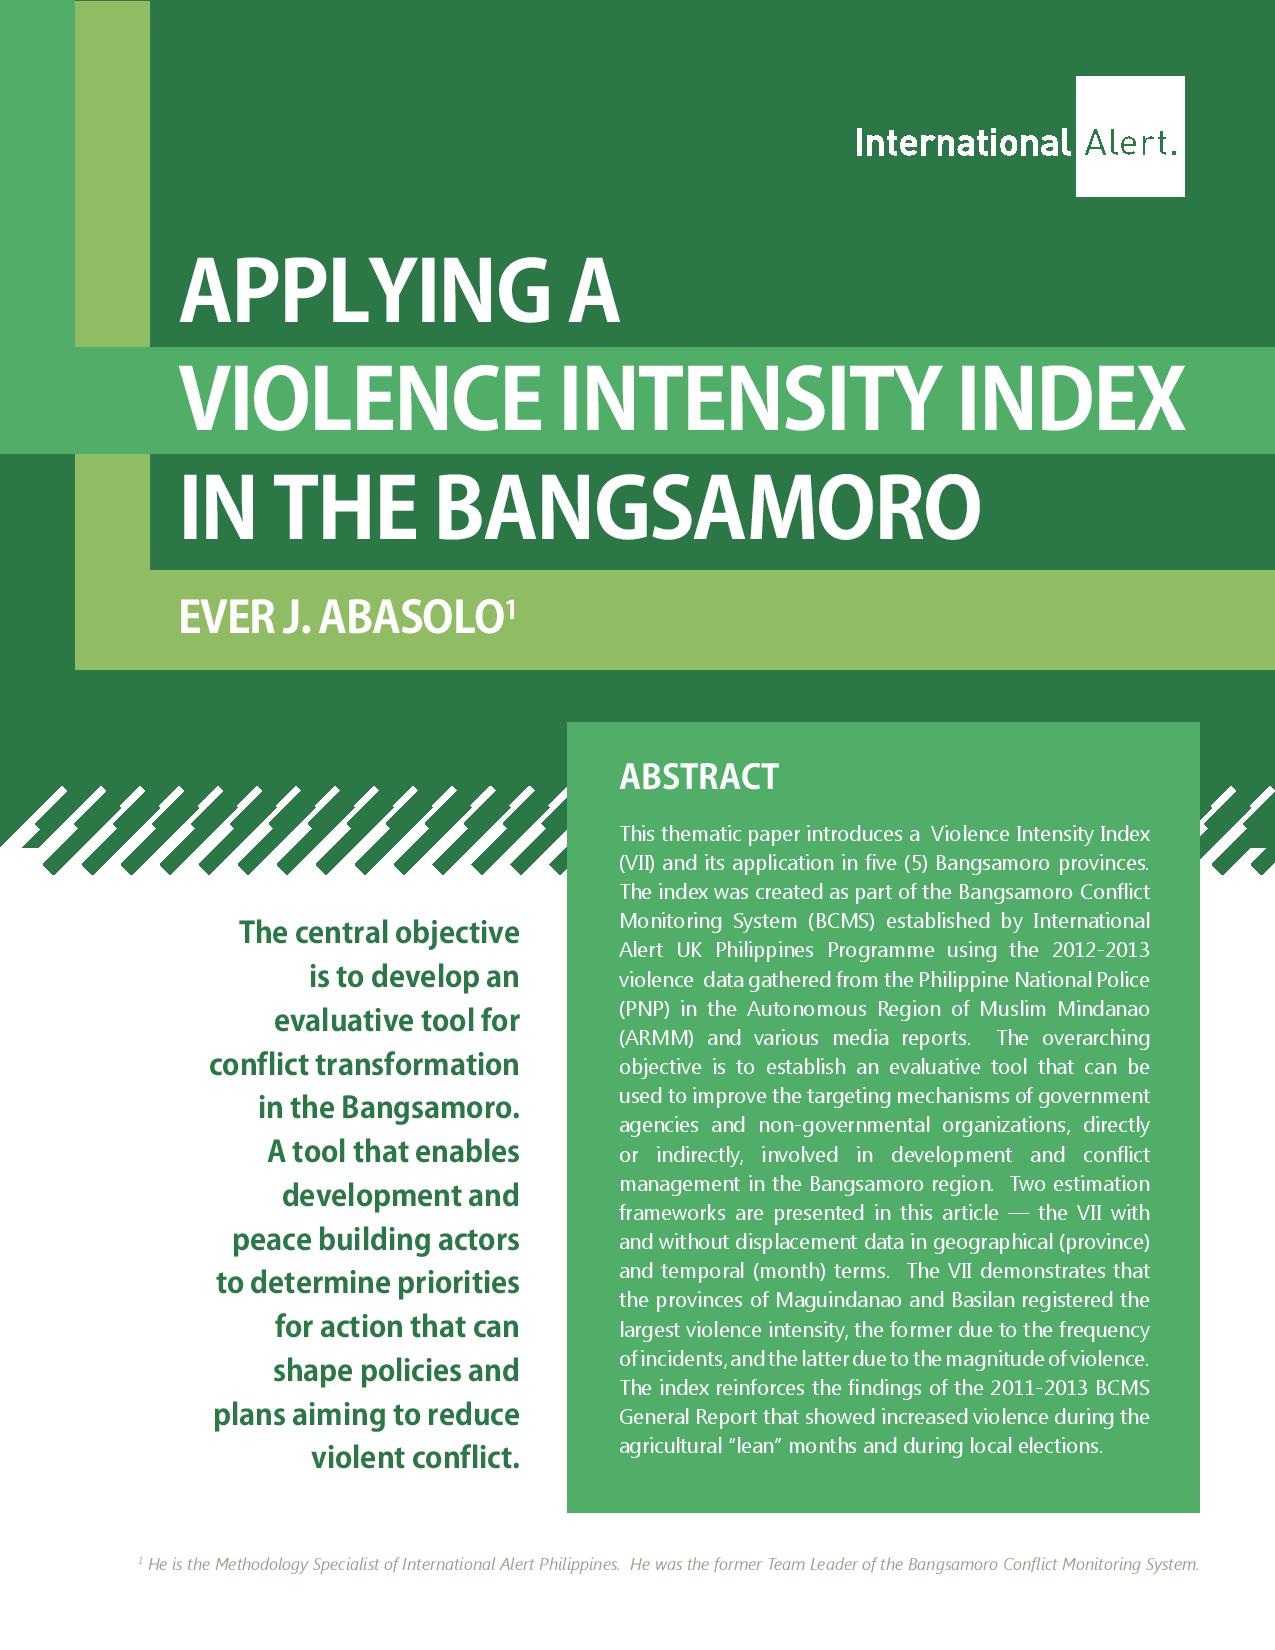 Applying a violence intensity index in the Bangsamoro